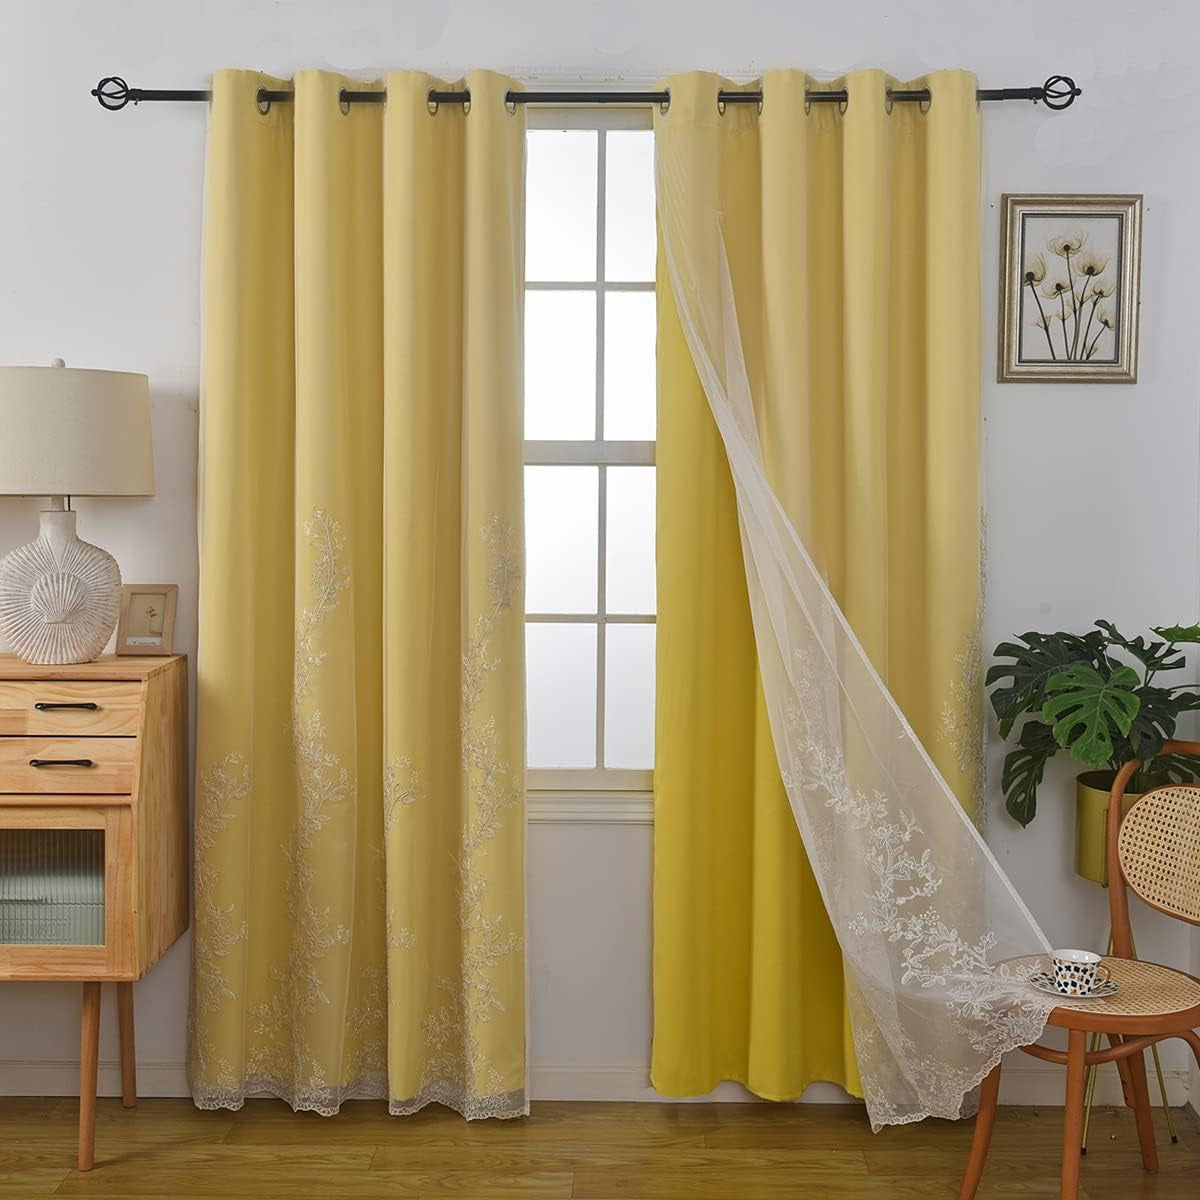 GYROHOME Double Layered Curtains with Embroidered White Sheer Tulle, Mix and Match Curtains Room Darkening Grommet Top Thermal Insulated Drapes,2Panels,52X84Inch,Beige  GYROHOME Yellow 52Wx63Lx2 